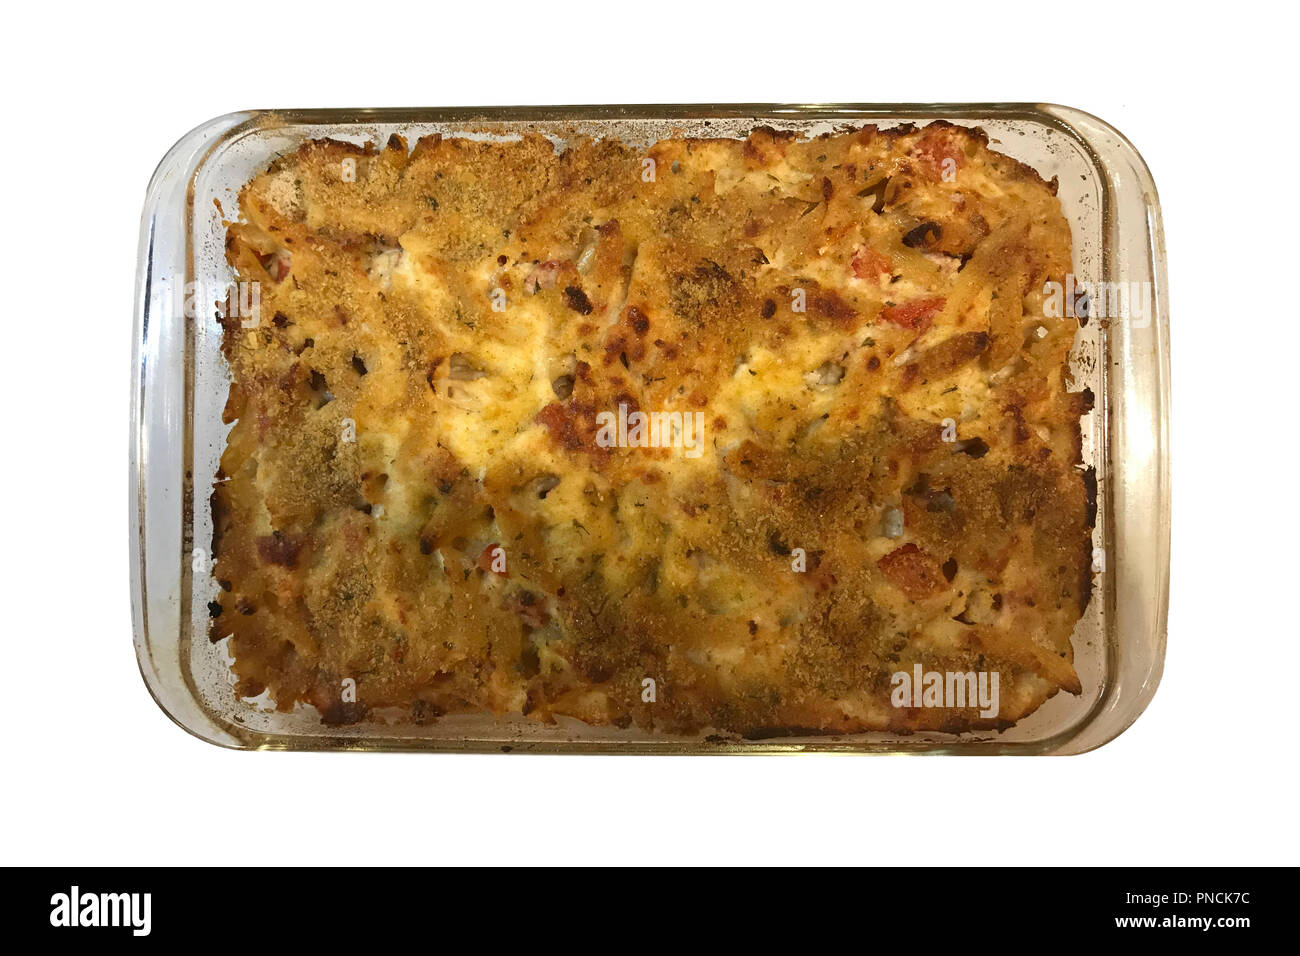 Baked mac & cheese in a glass casserole dish isolated on a white background Stock Photo